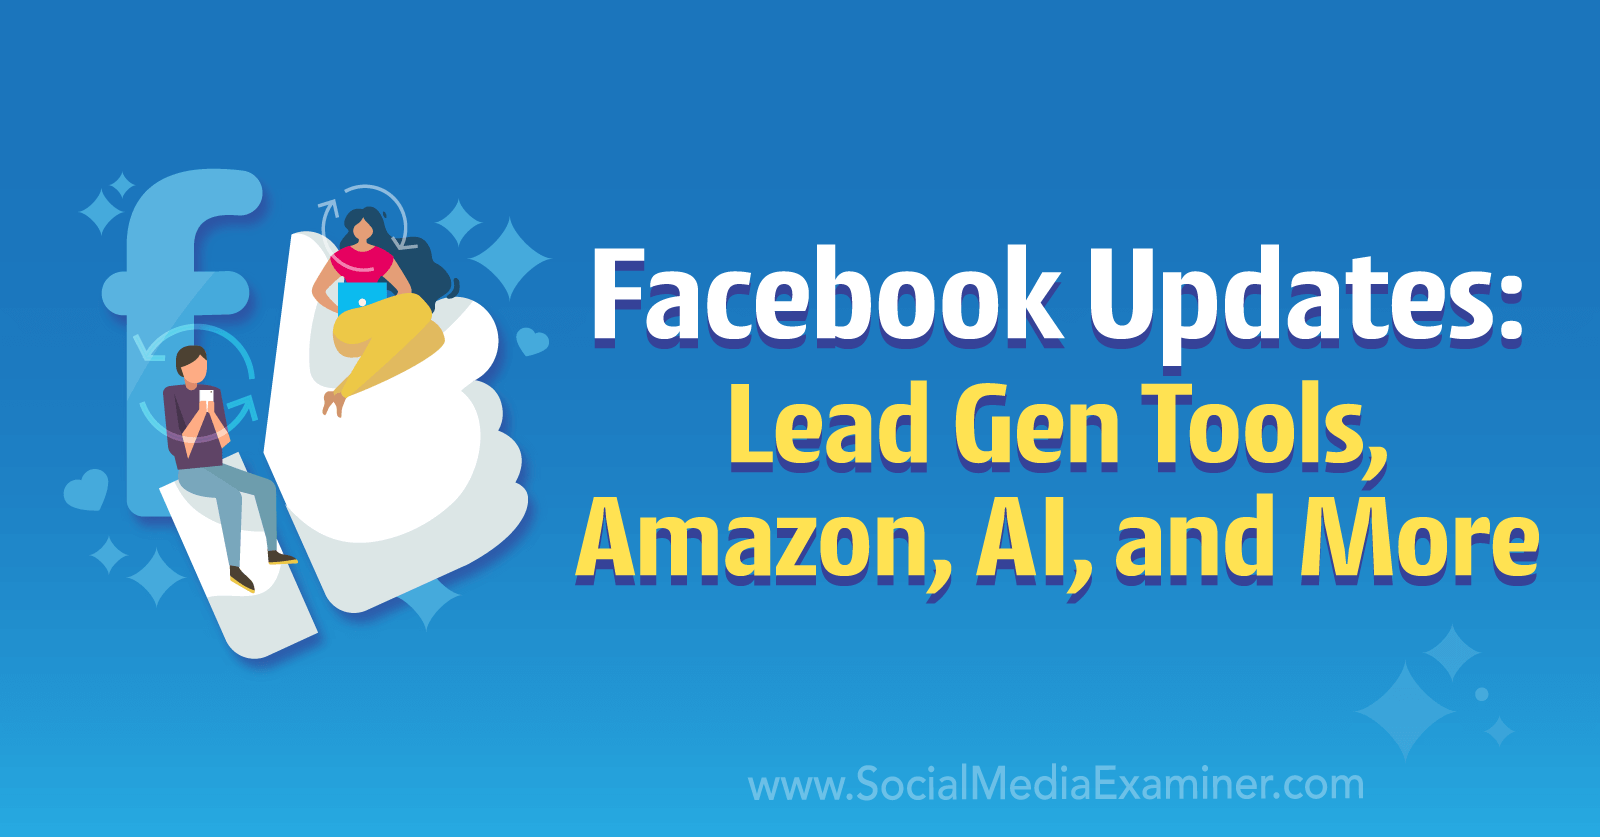 Facebook Updates: Lead Gen Tools, Amazon, AI, and More by Social Media Examiner